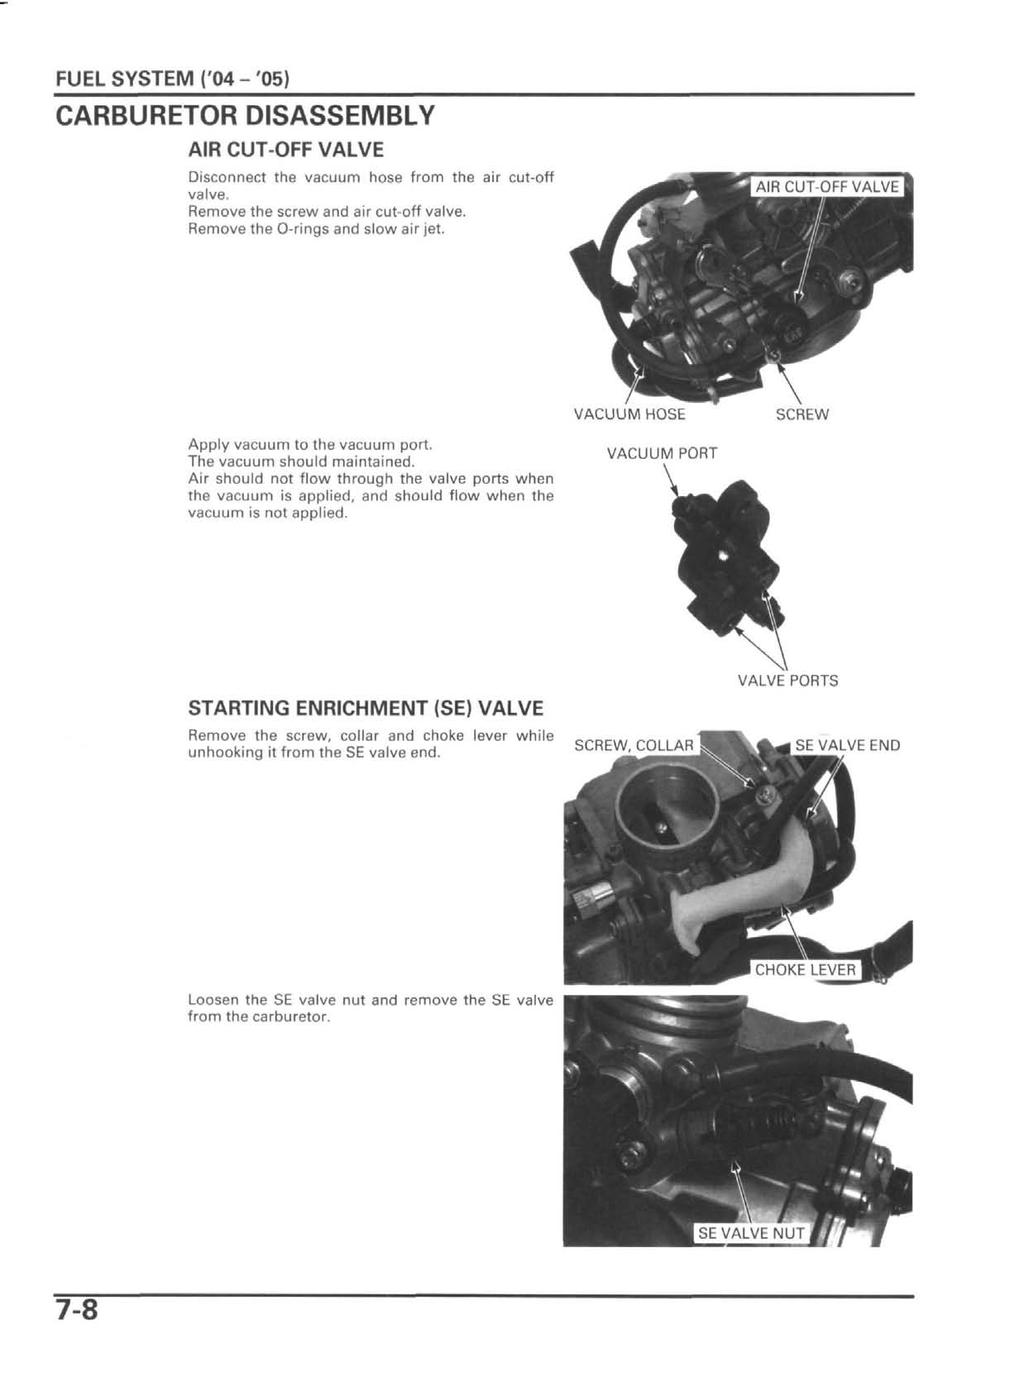 FUEL SYSTEM ('04 - '05) CARBURETOR DISASSEMBLY AIR CUT-OFF VALVE Disconnect the vacuum hose from the air cut-off valve. Remove the screw and air cut-off valve. Remove the O-rings and slow air jet.